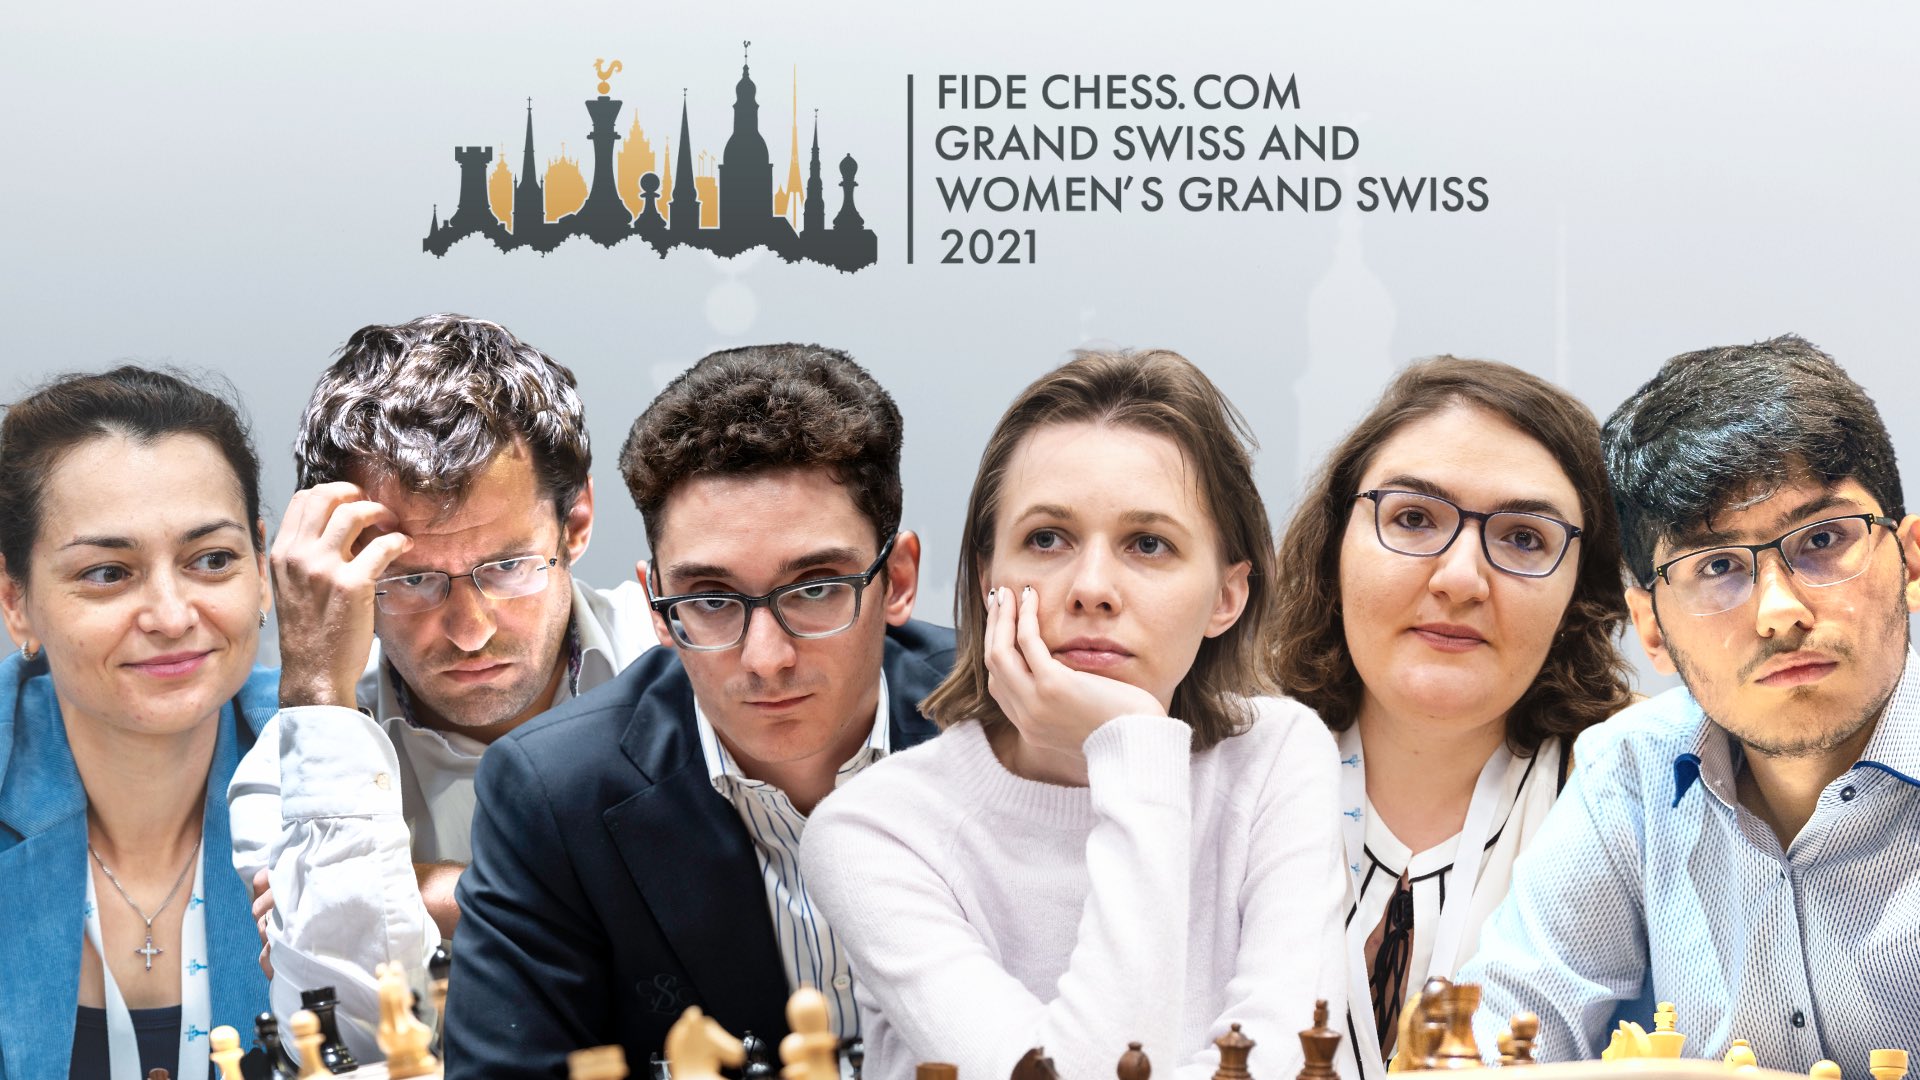 FIDE Chess.com Grand Swiss 2021 concluded – European Chess Union